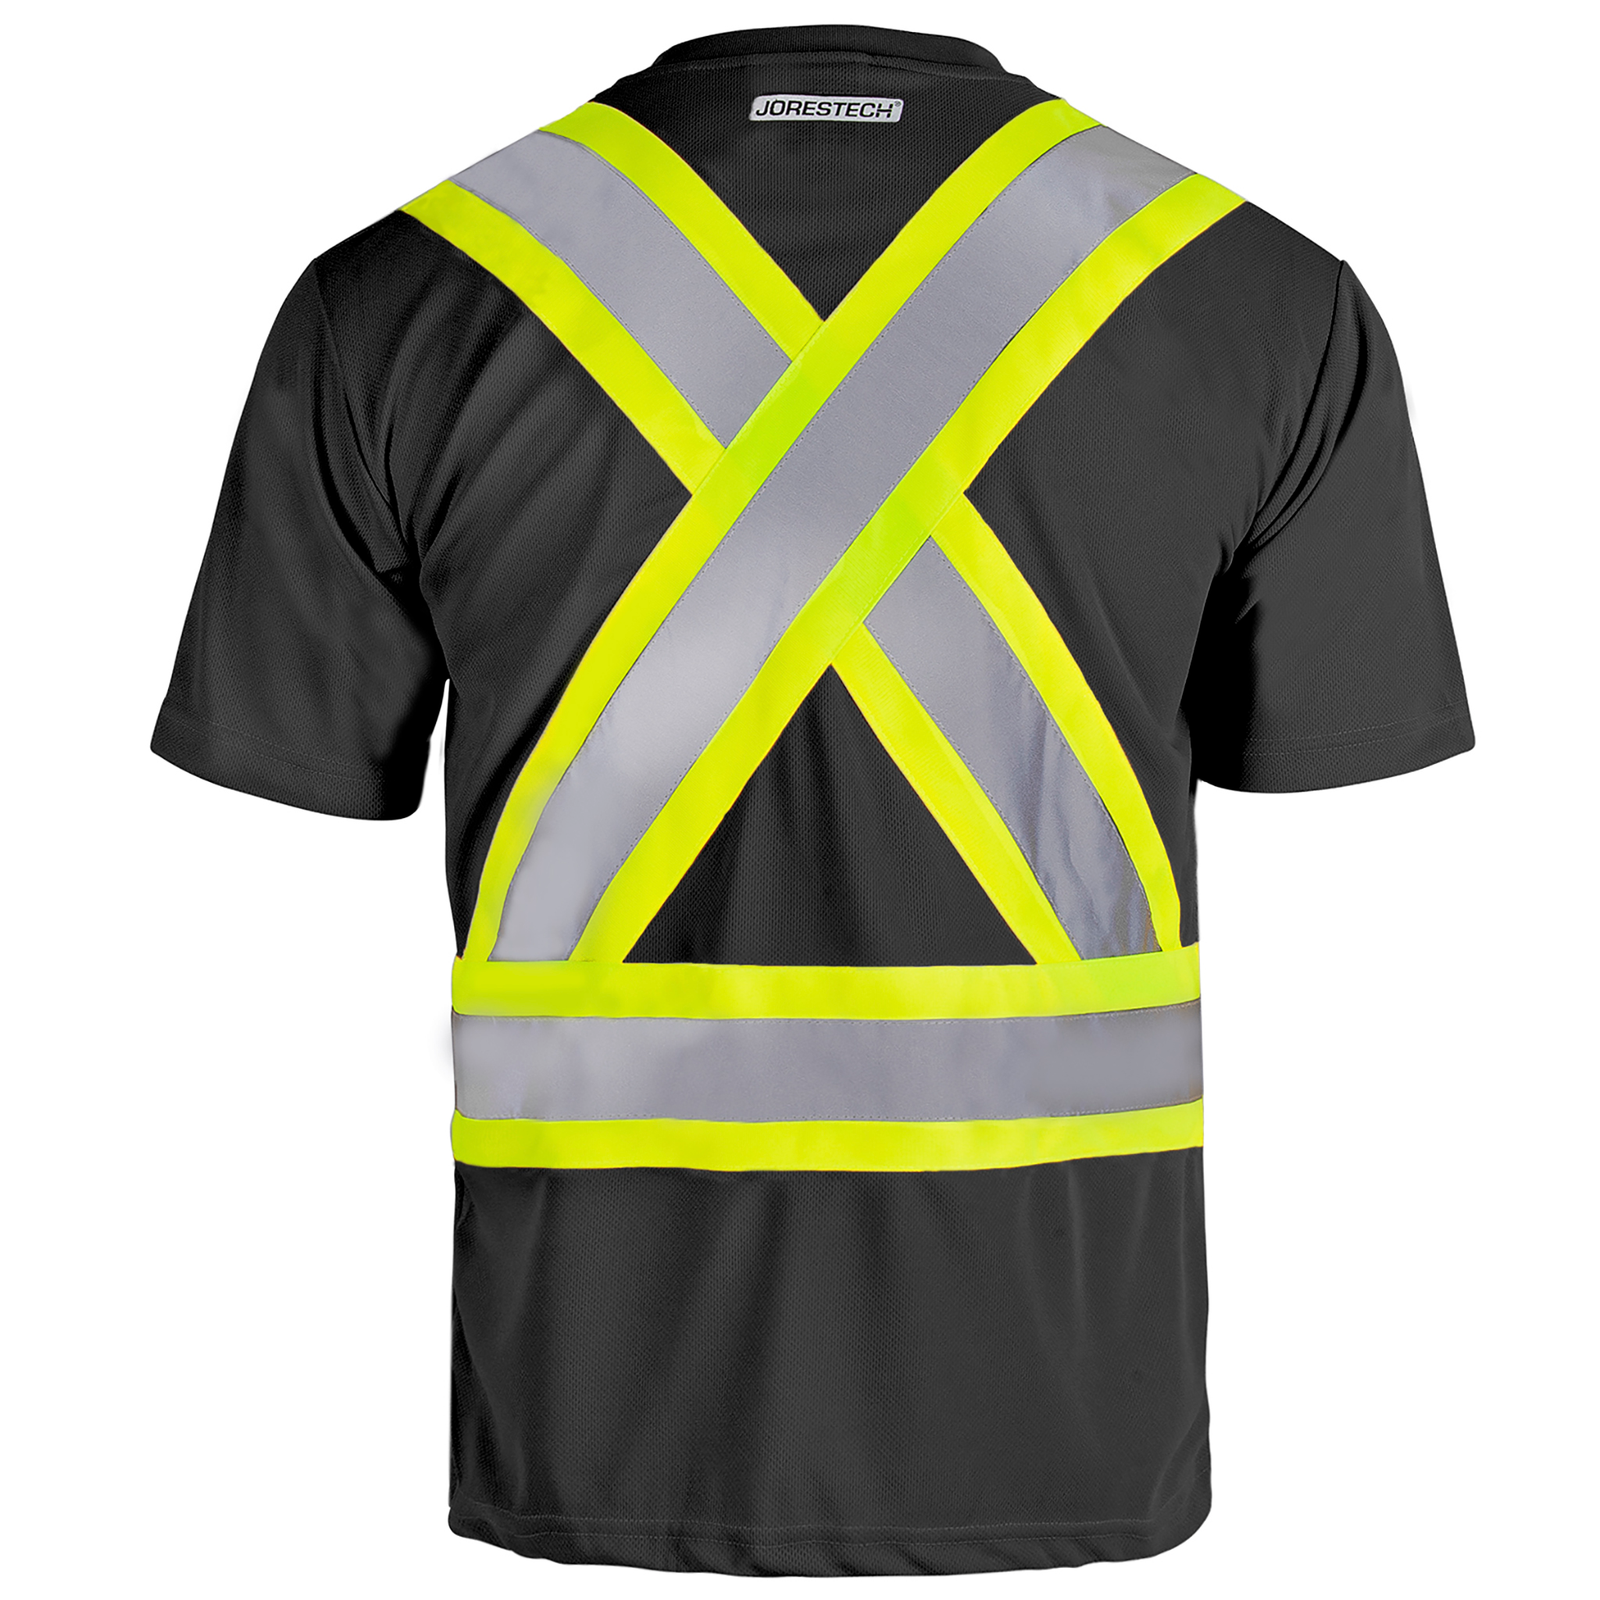 Back view of a Hi-vis reflective two tone JORESTECH safety black and yellow pocket shirt with X on the back